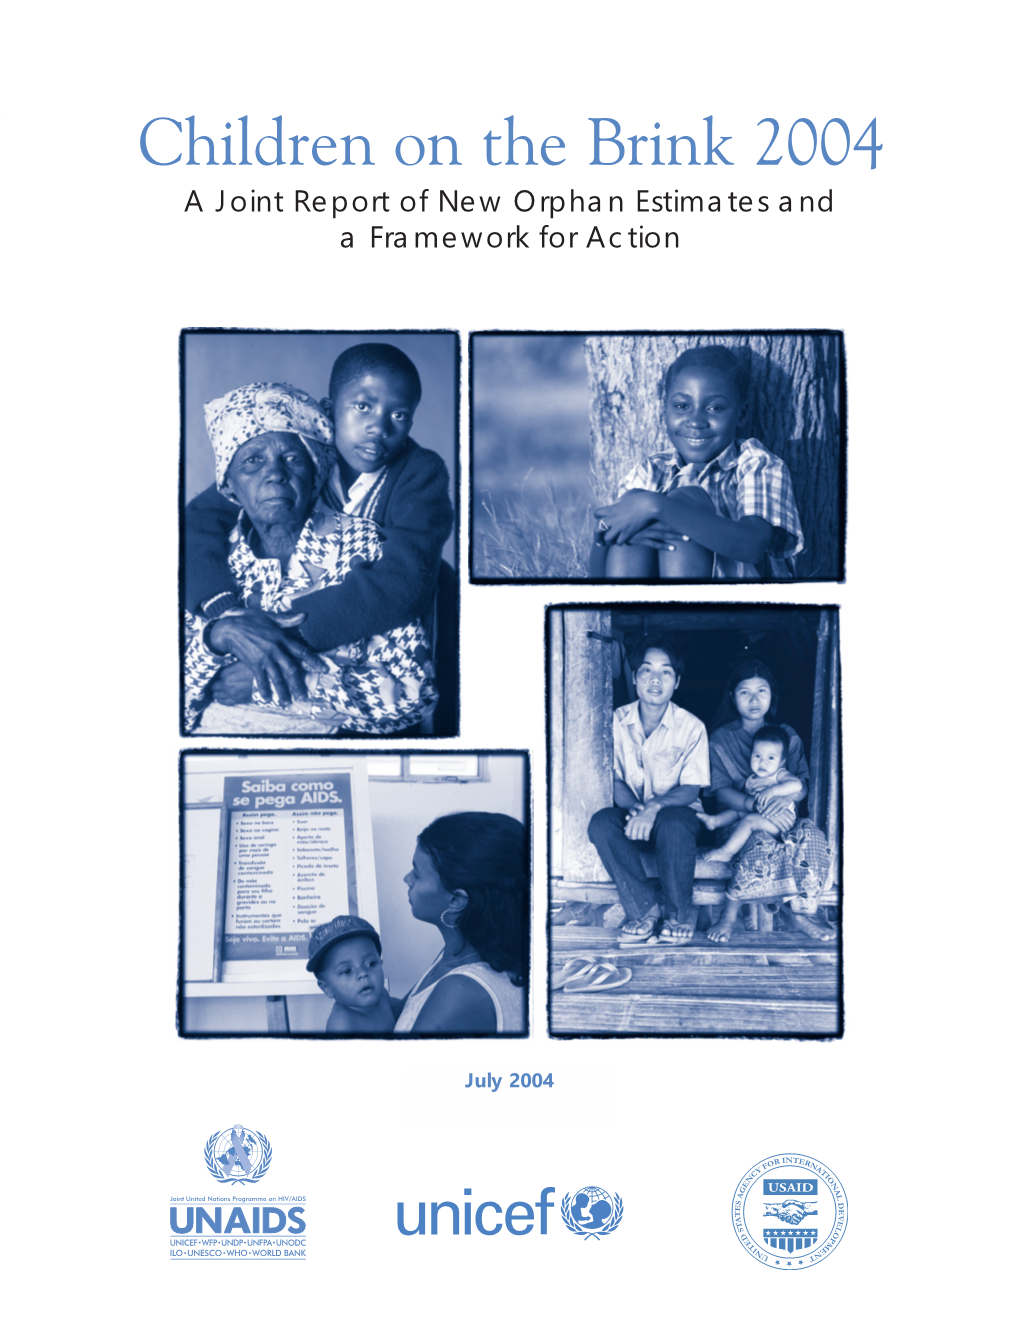 Children on the Brink 2004 a Joint Report of New Orphan Estimates and a Framework for Action